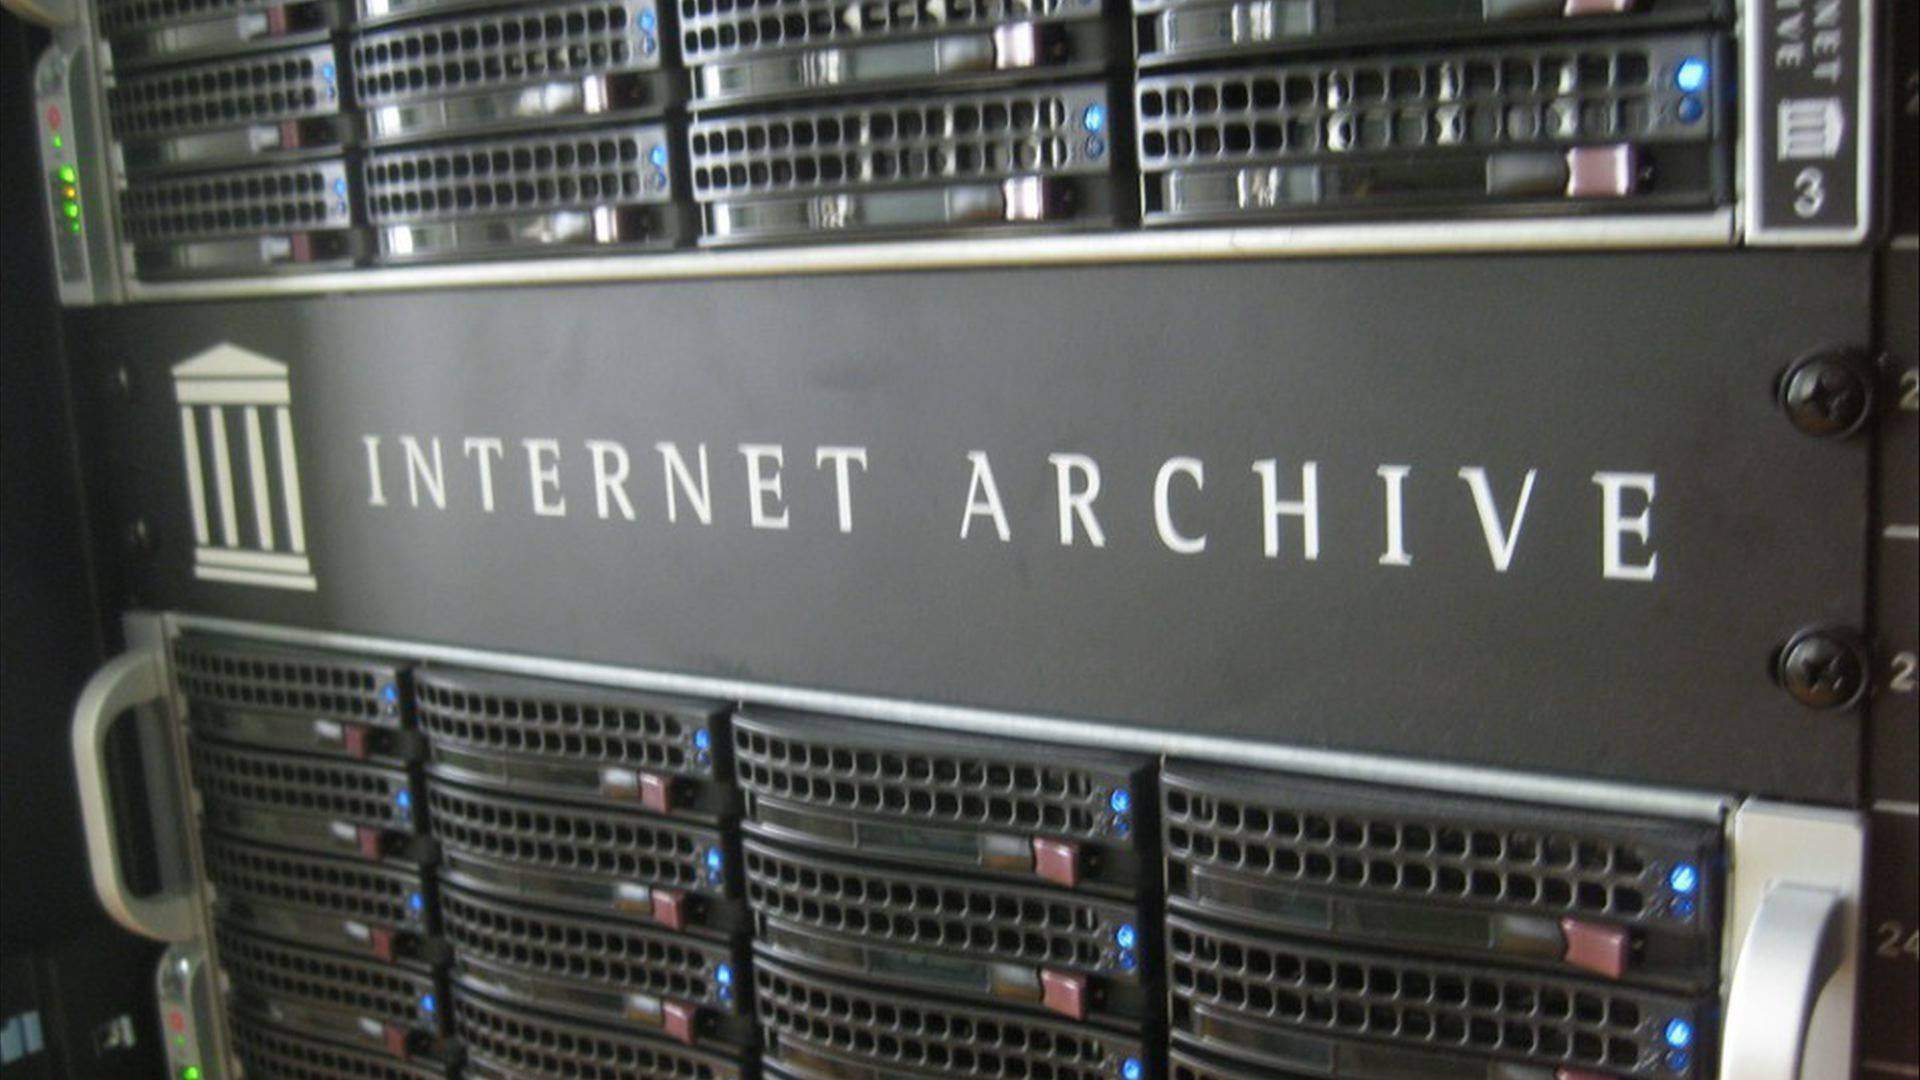 Free access to Internet Archive's book collection may be terminated due to a copyright litigation